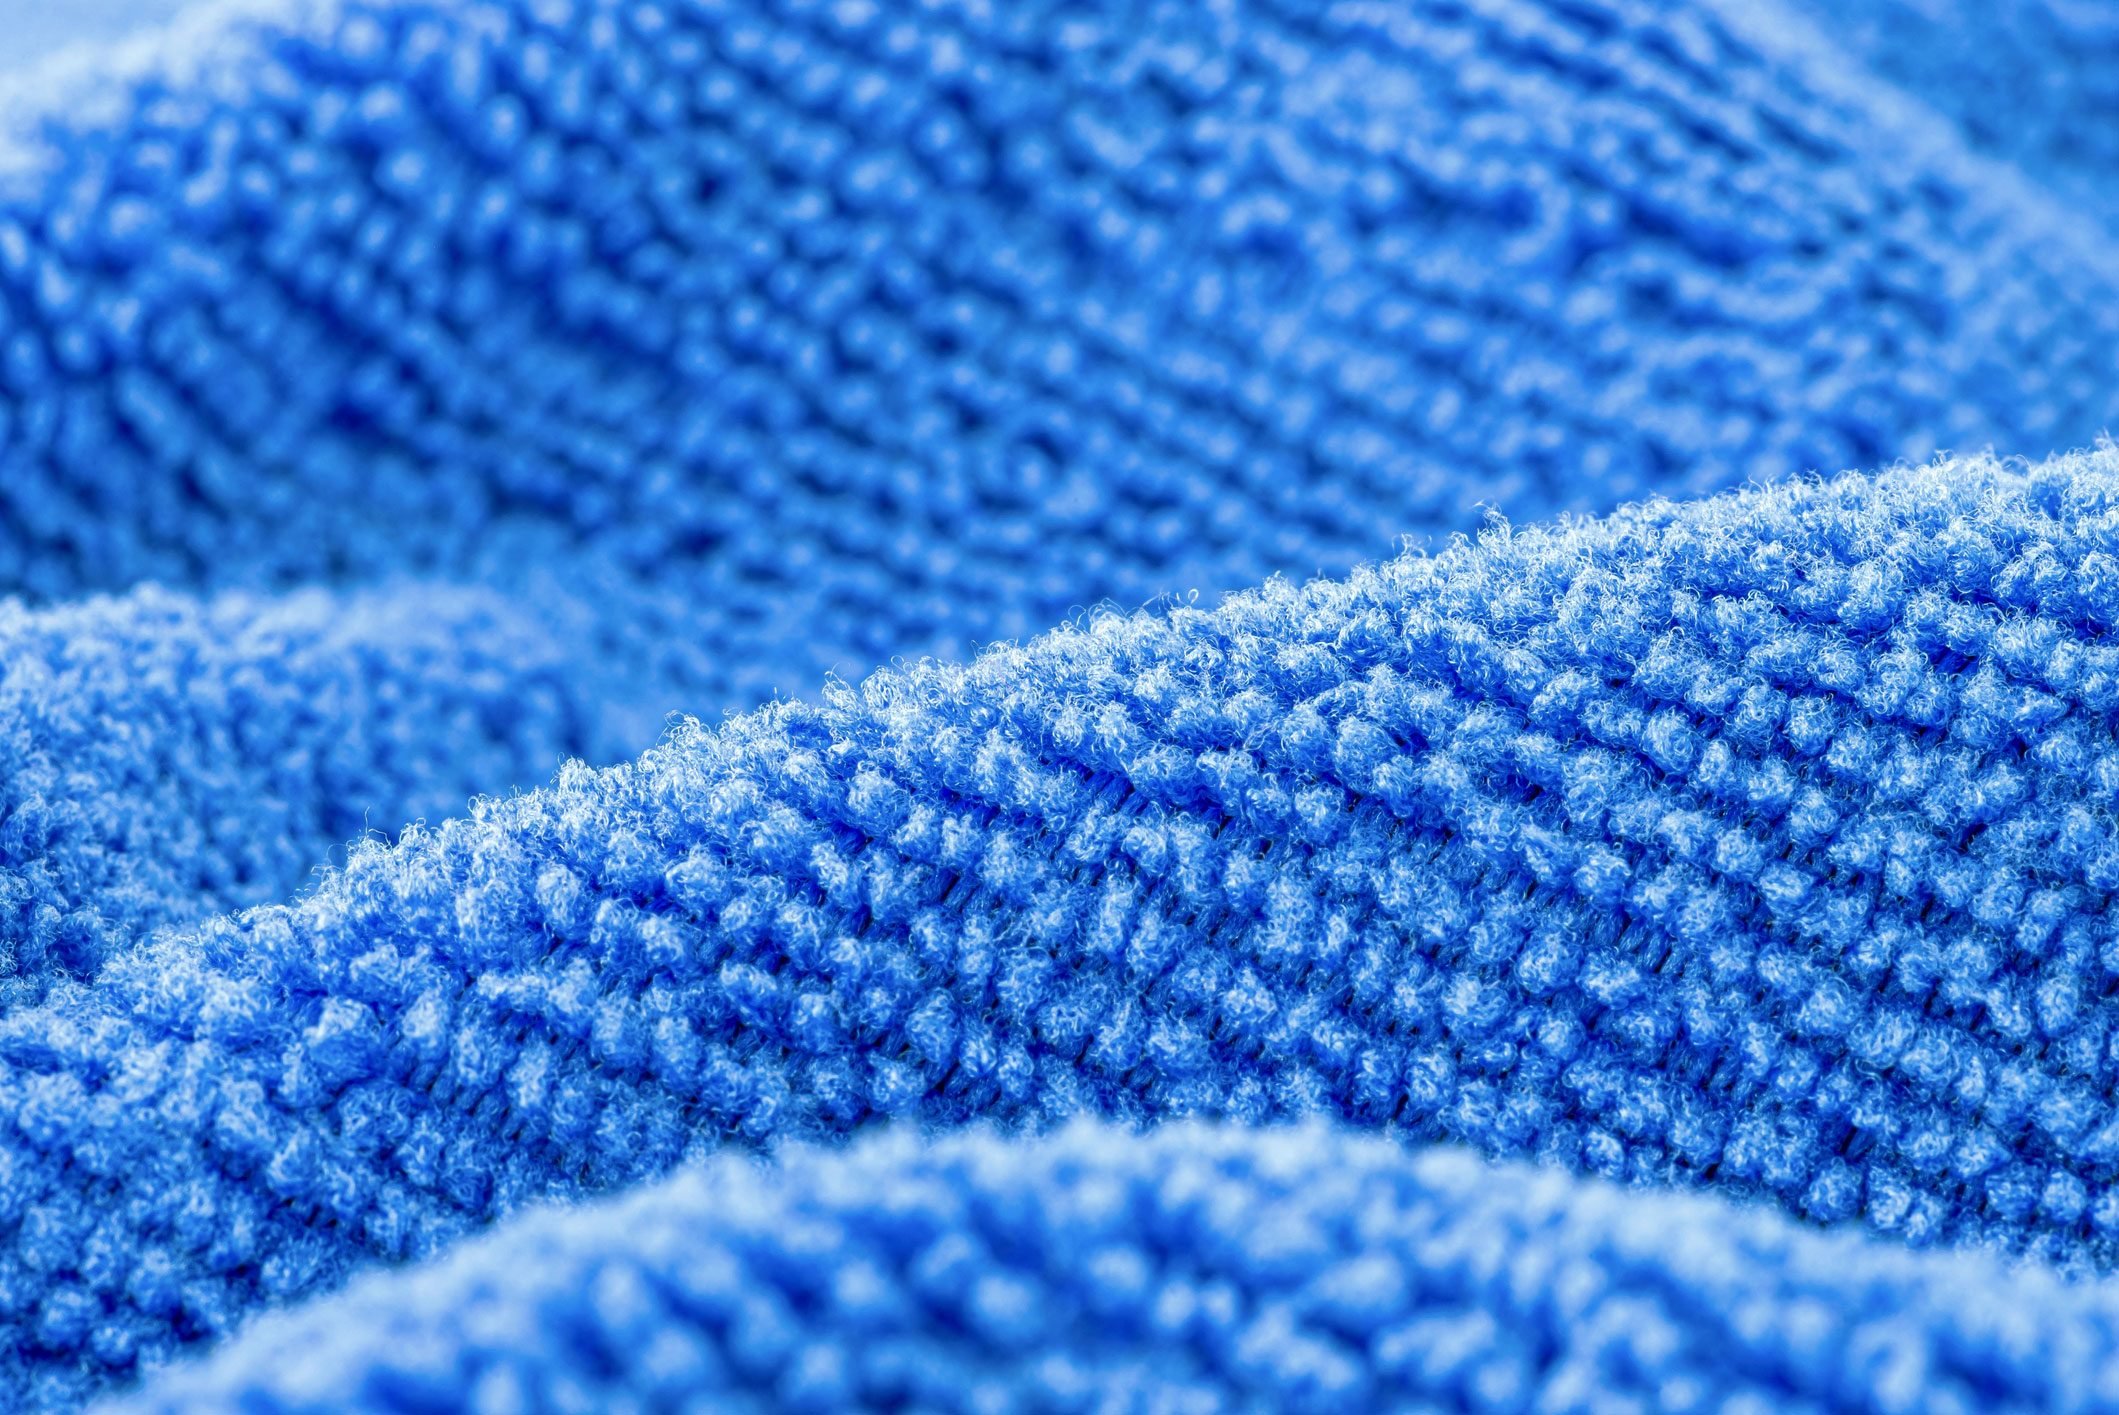 How To Keep Your Dish Cloth Stink & Stain Free